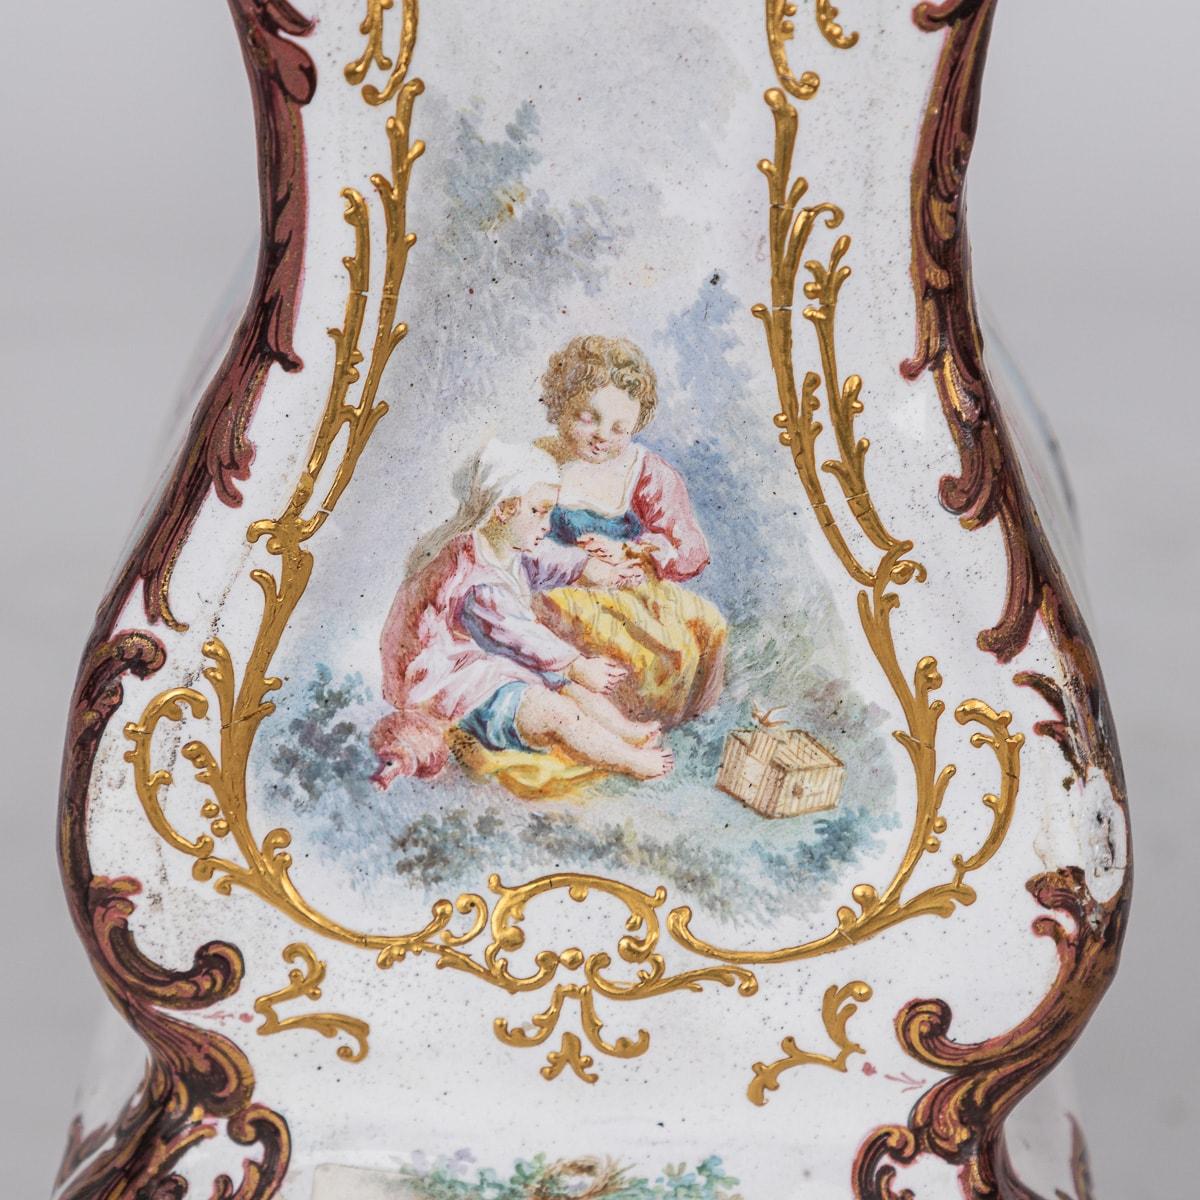 18th Century English Enamel Table Clock With Floral & Romantic Scenes c.1770 For Sale 6